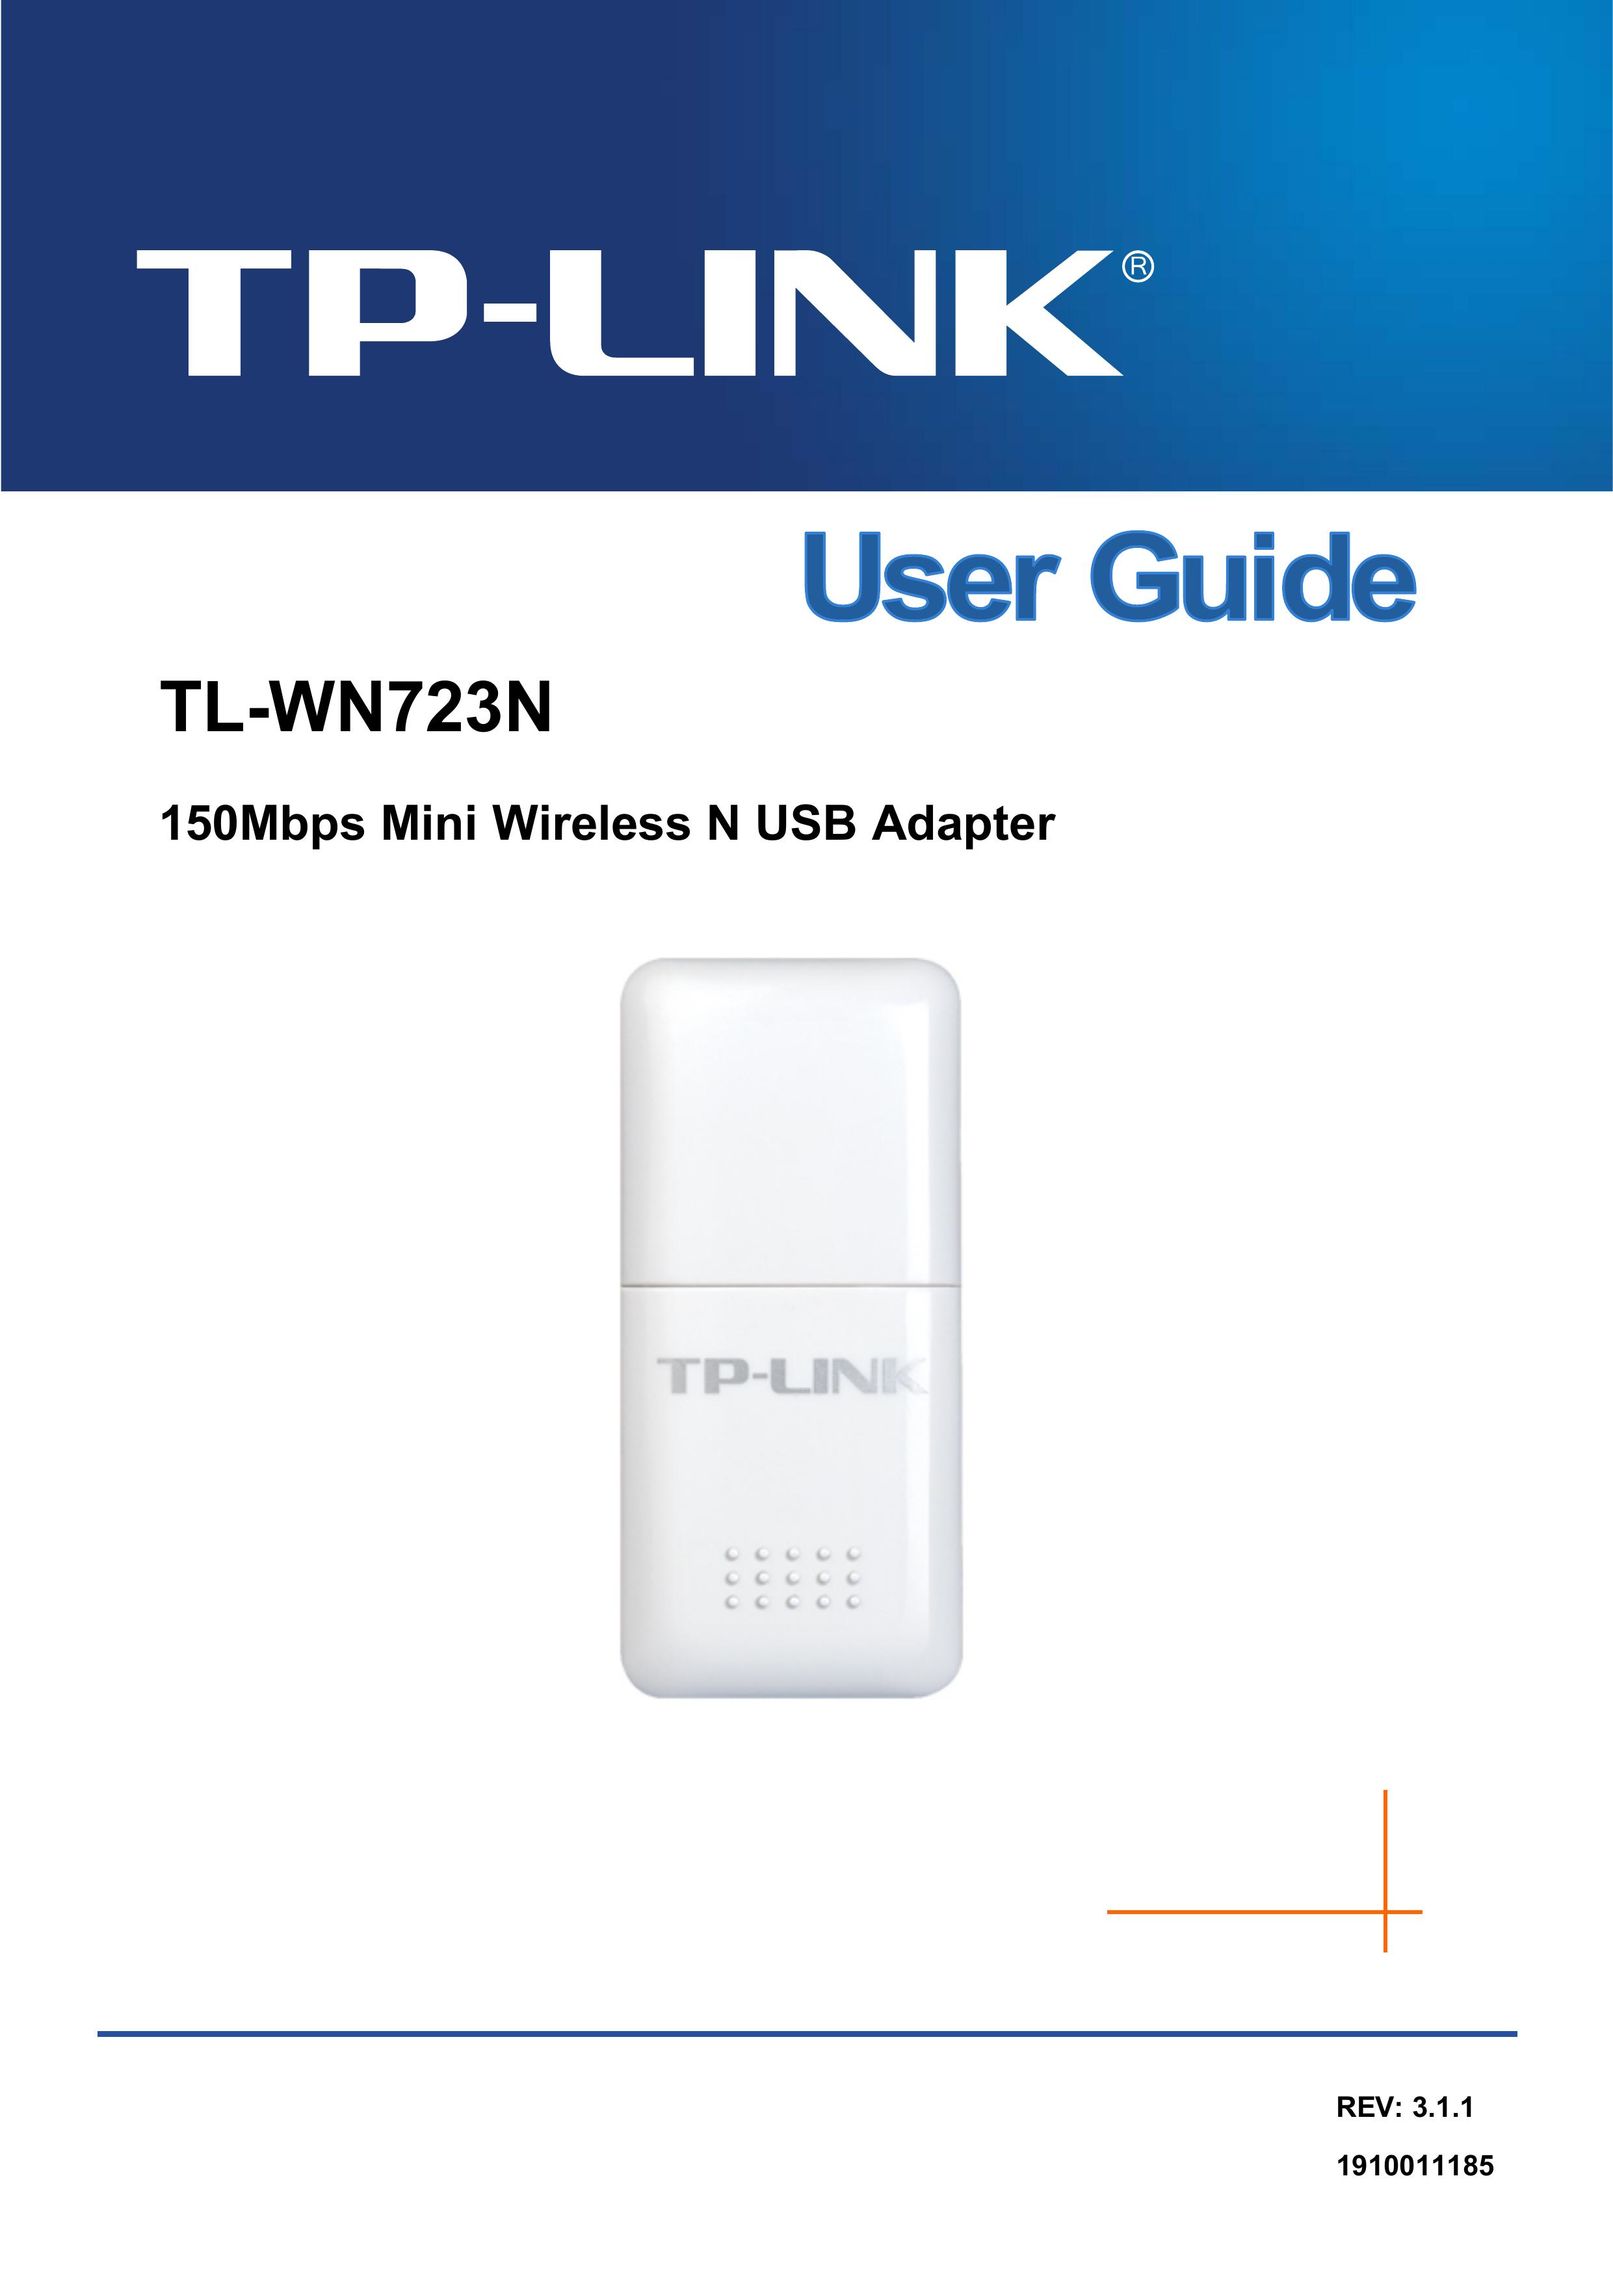 TP-Link 150Mbps Mini Wireless N USB Adapter Network Card User Manual